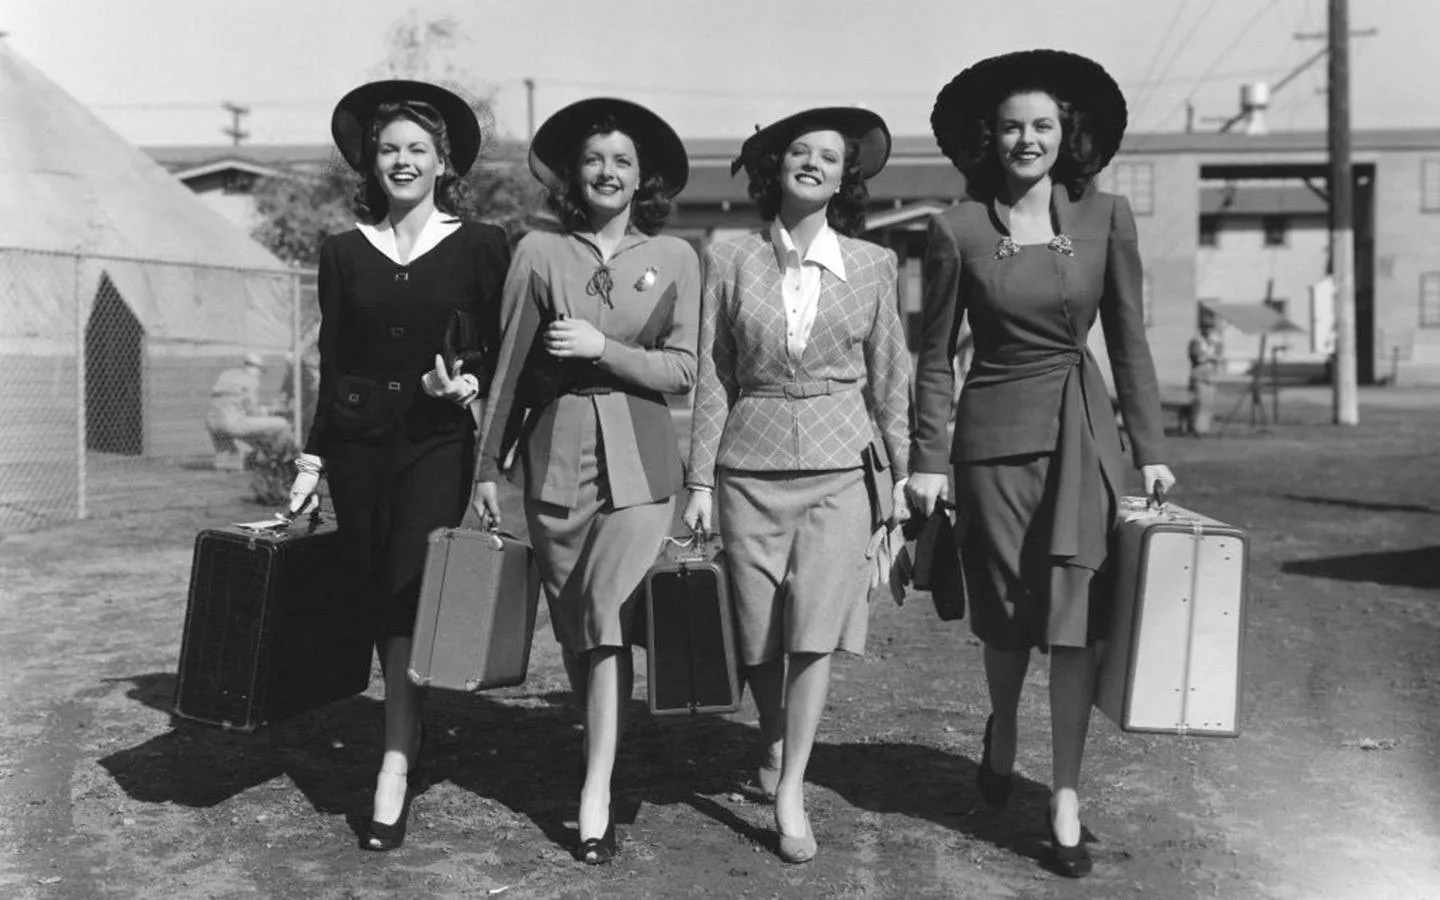 Four inspirational female travel pioneers